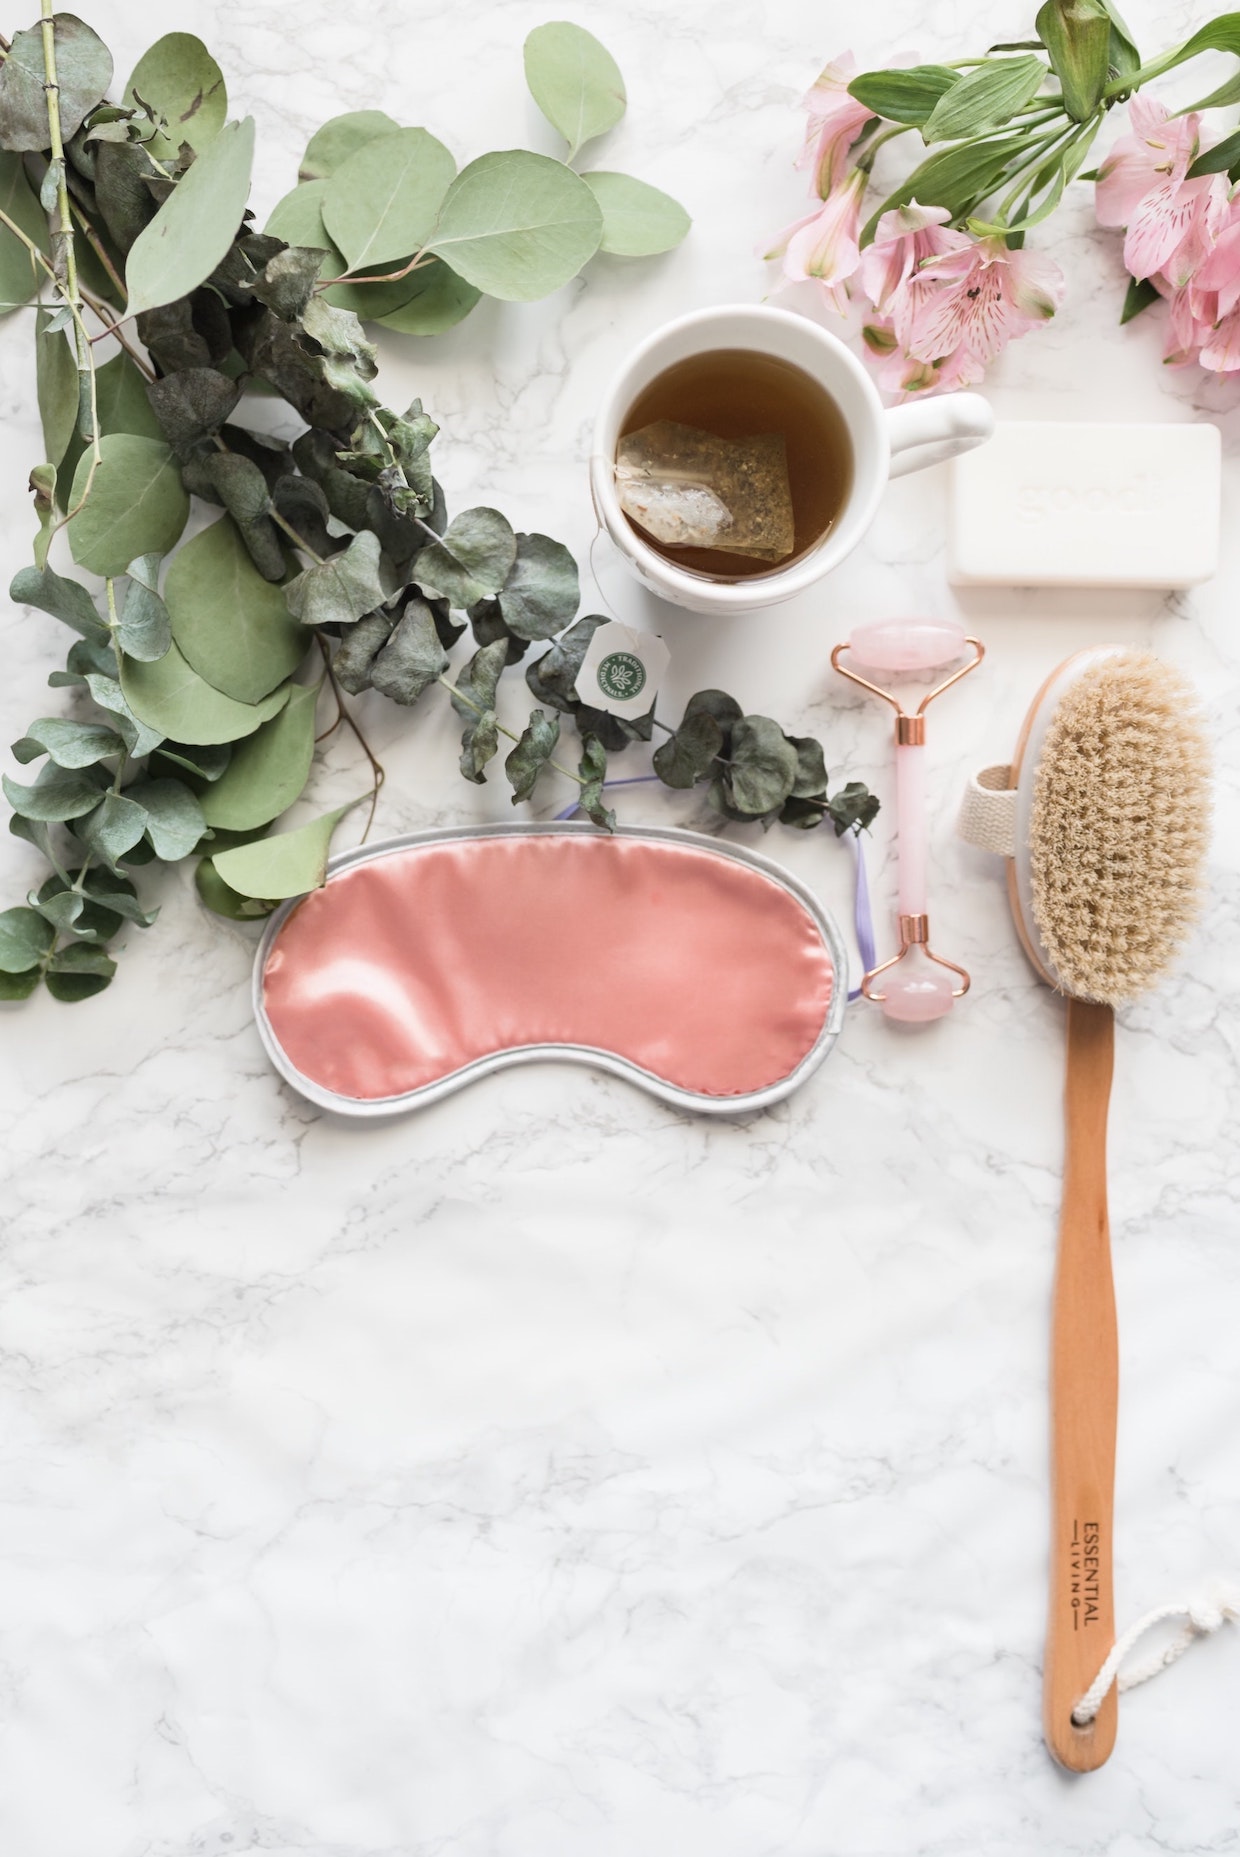 Strive for a beautiful skin: dry brush it!